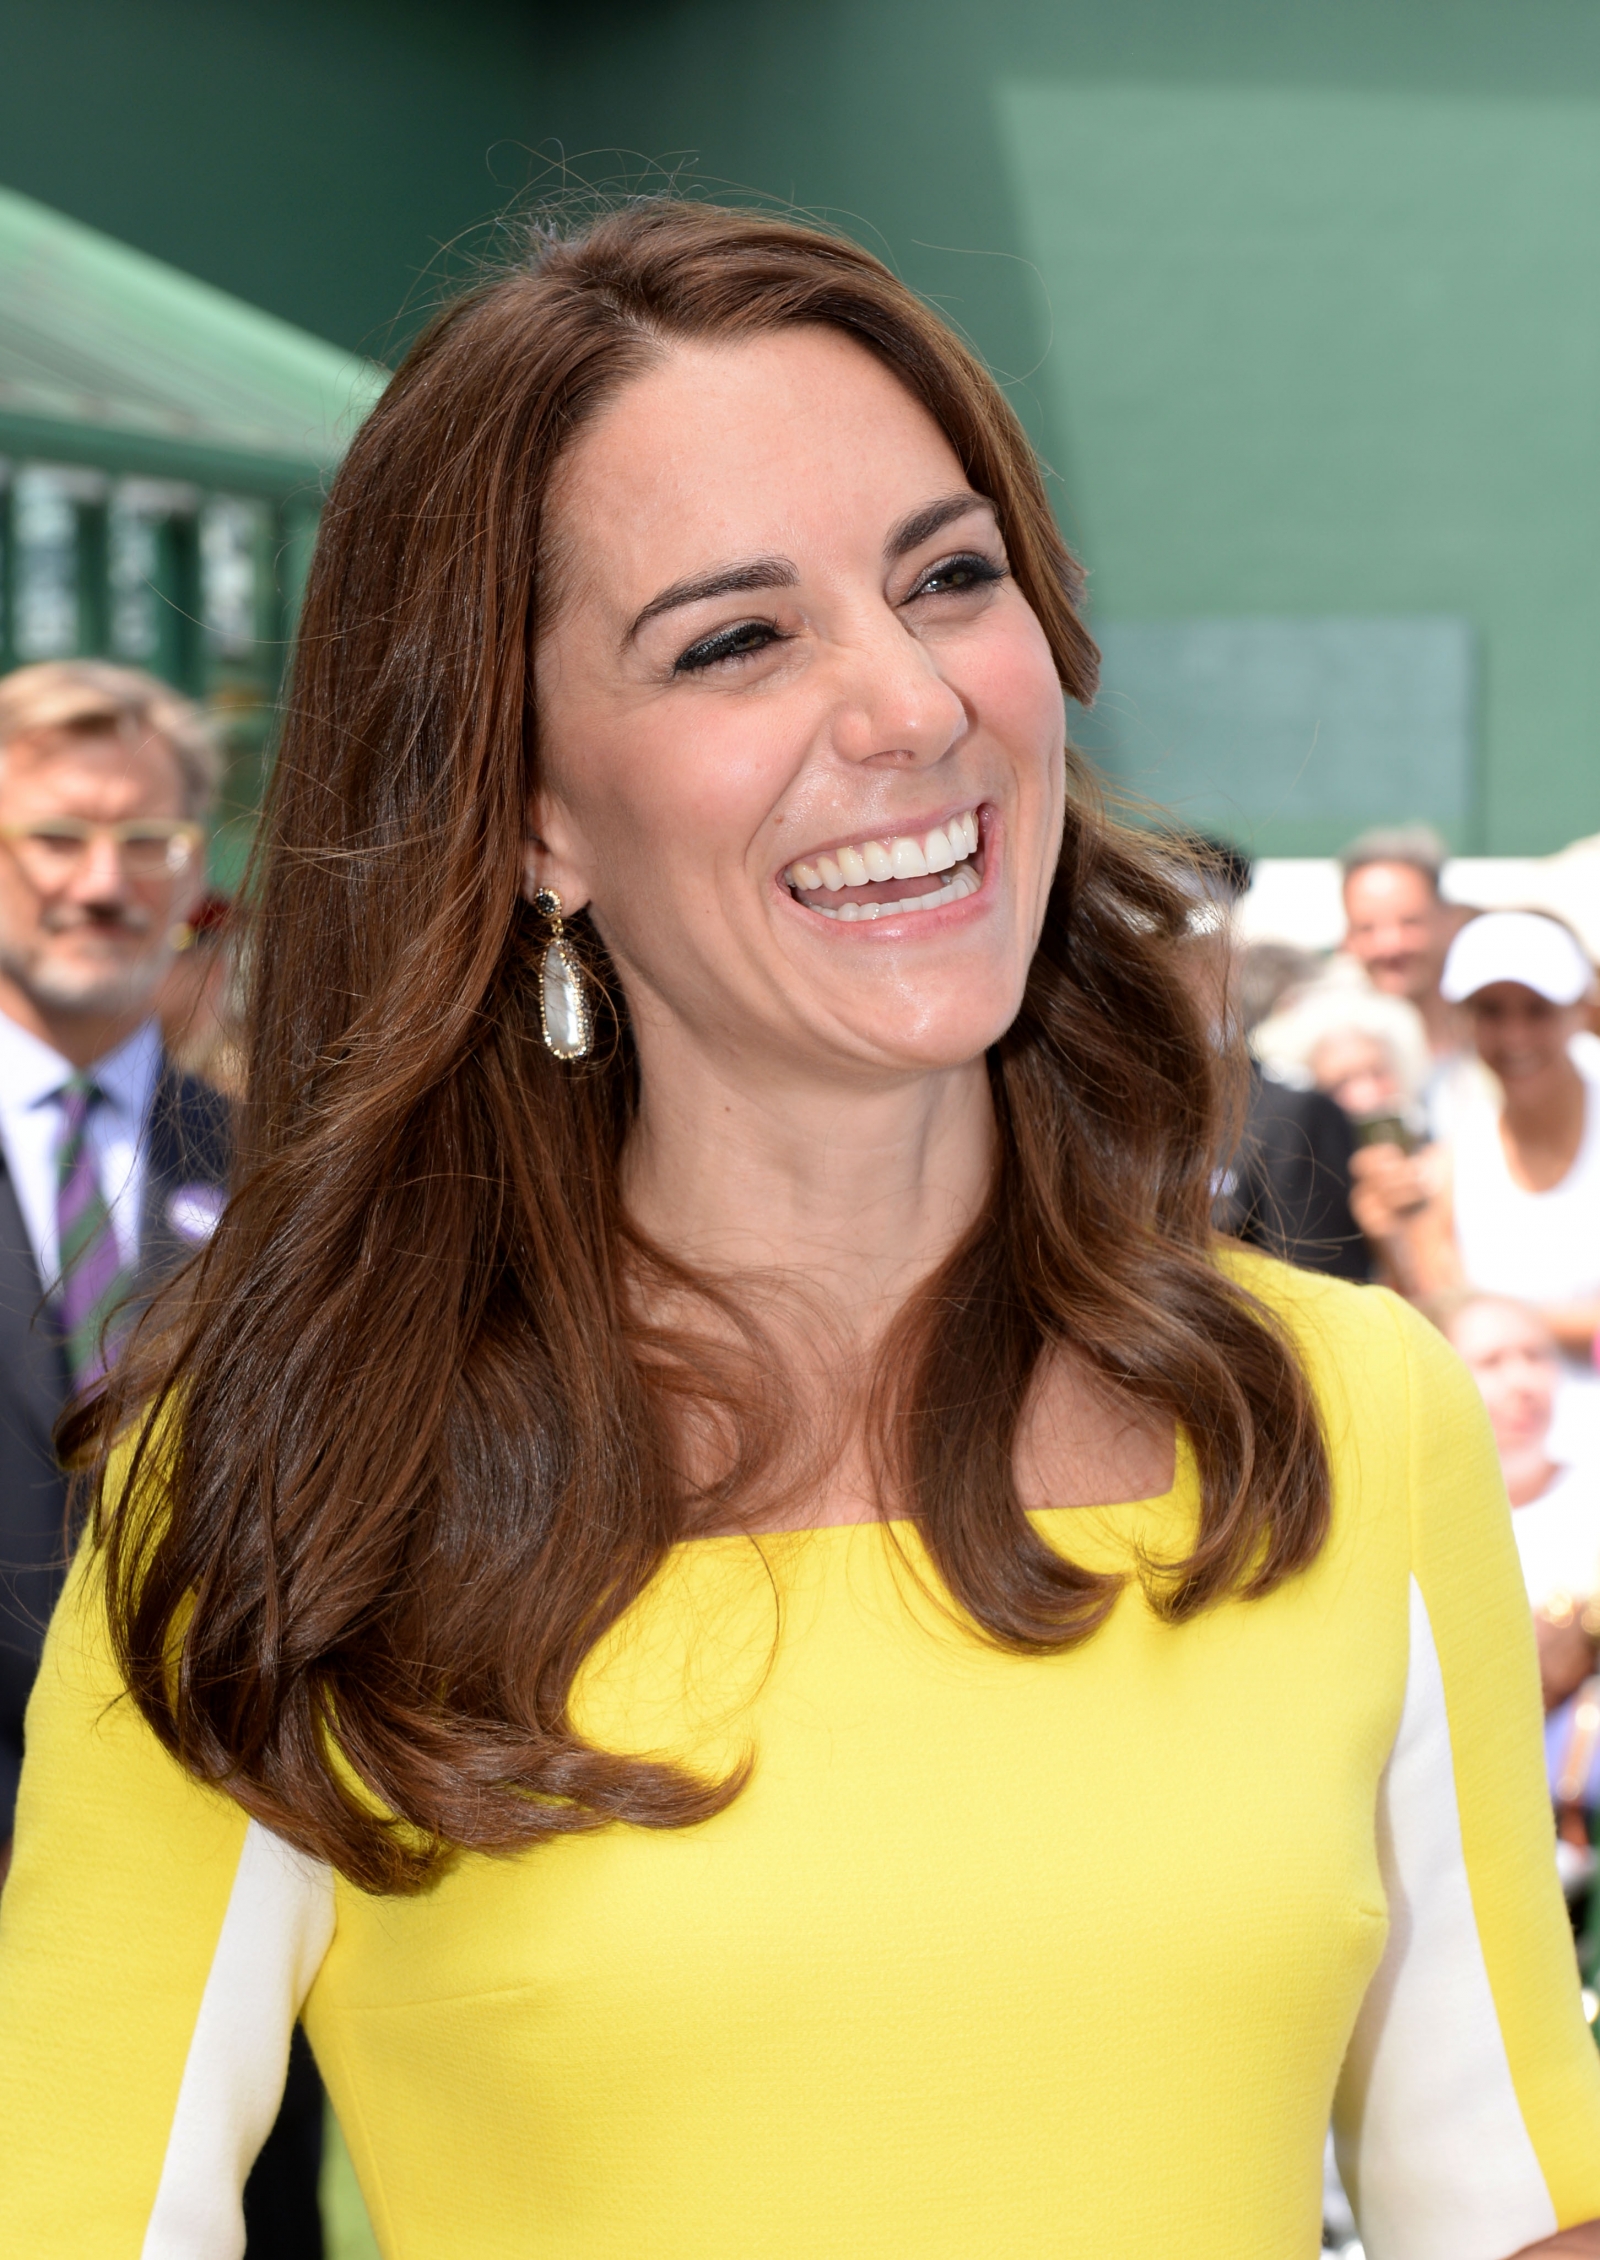 Kate Middleton Wallpapers High Quality | Download Free